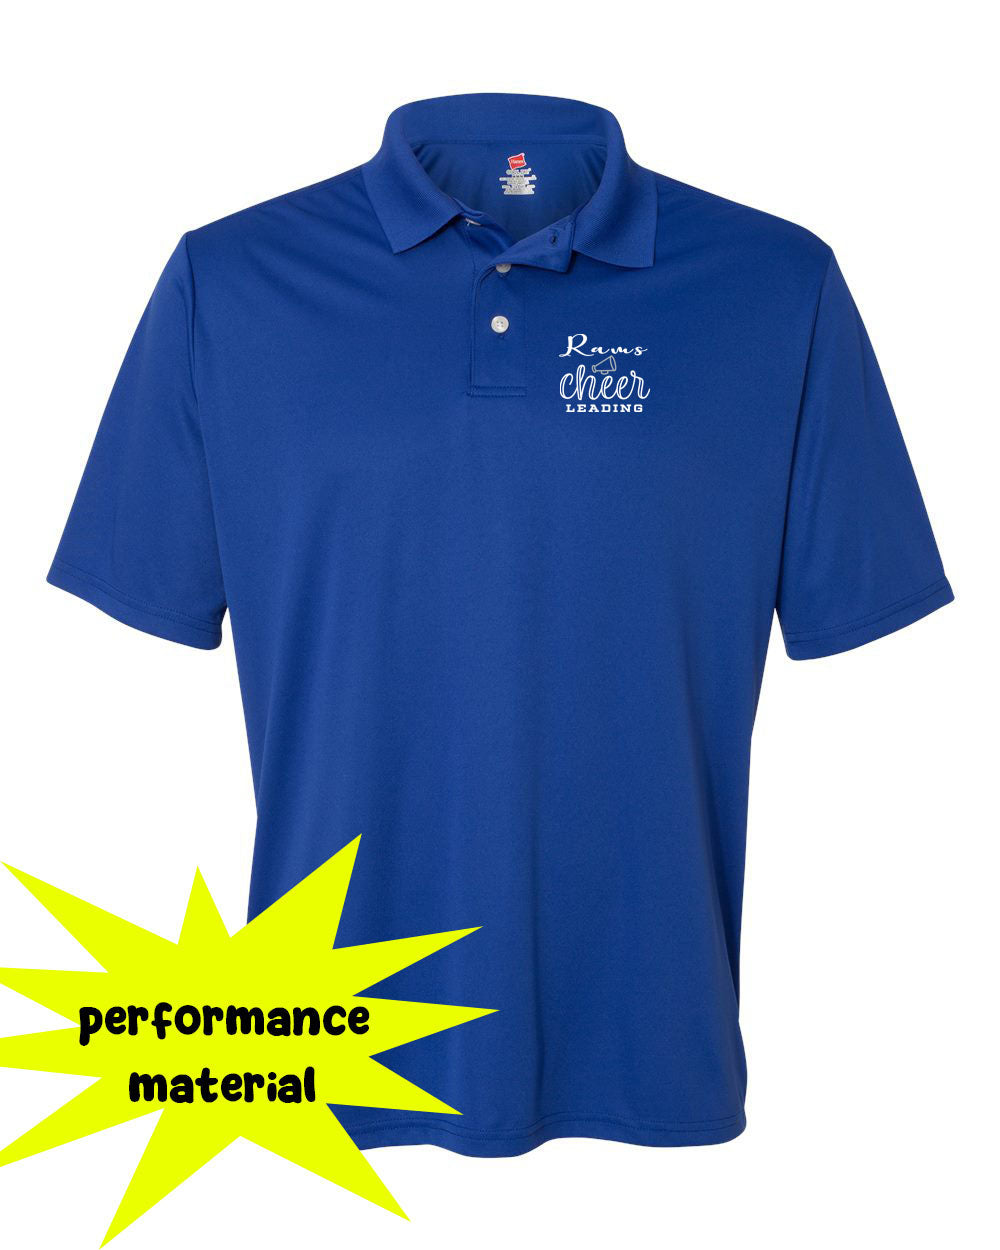 Franklin Cheer Performance Material Polo T-Shirt Design 2